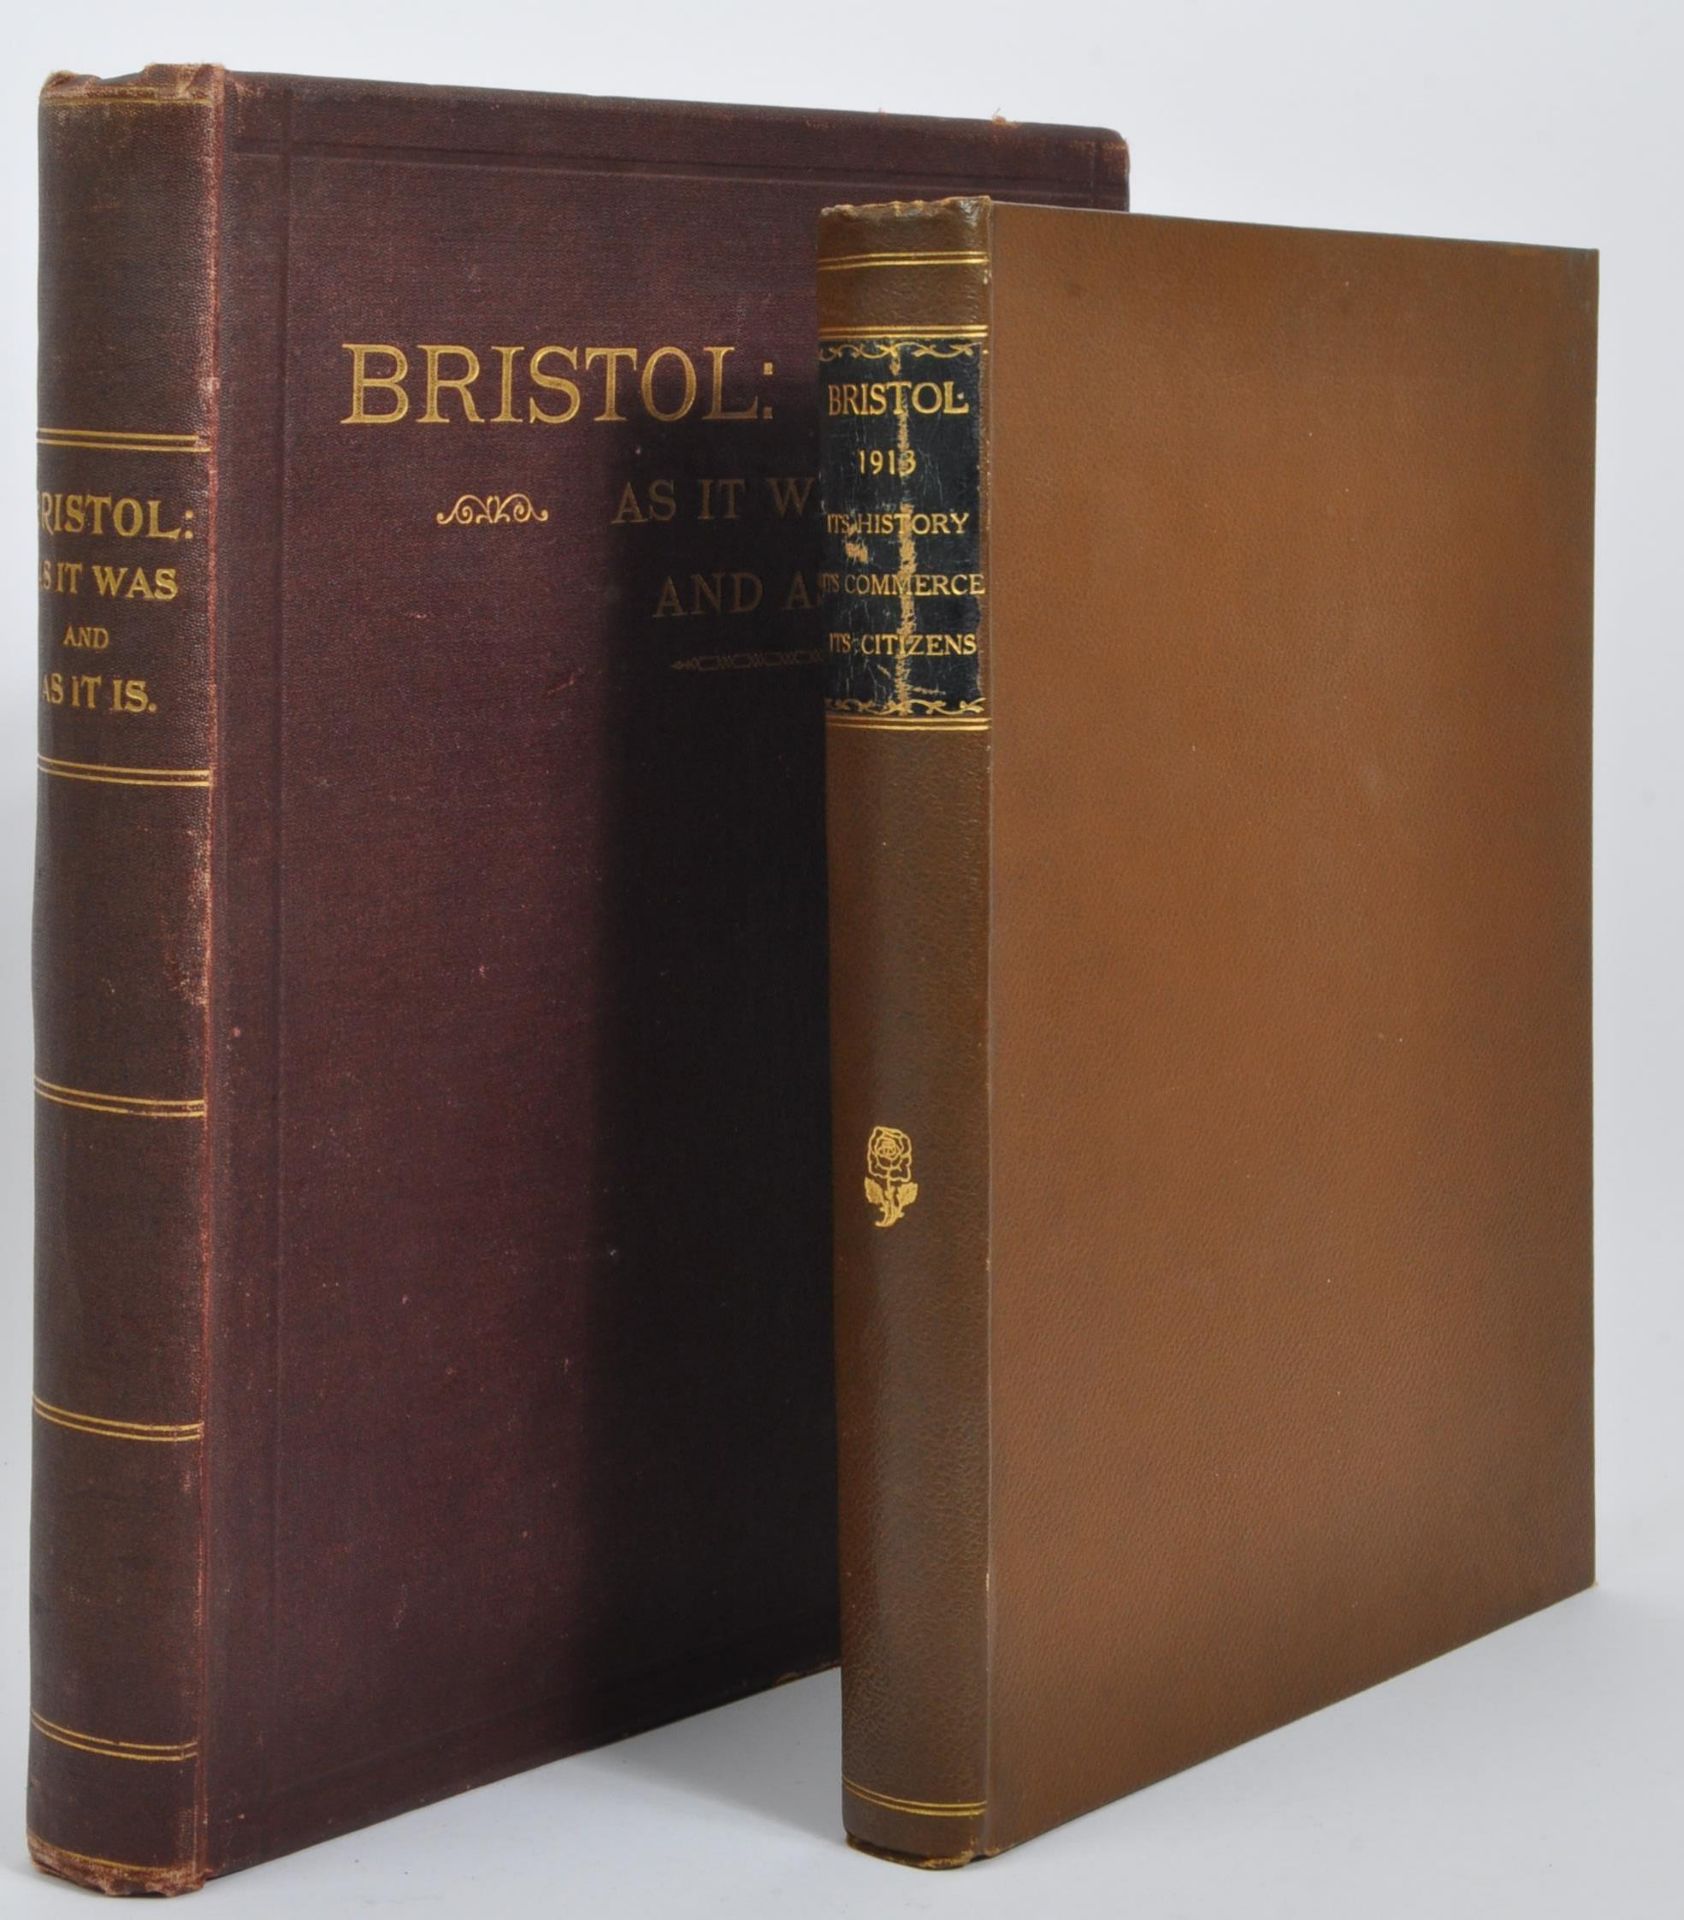 BRISTOL AS IT WAS AND AS IT IS - TWO HARDBACK BOOKS